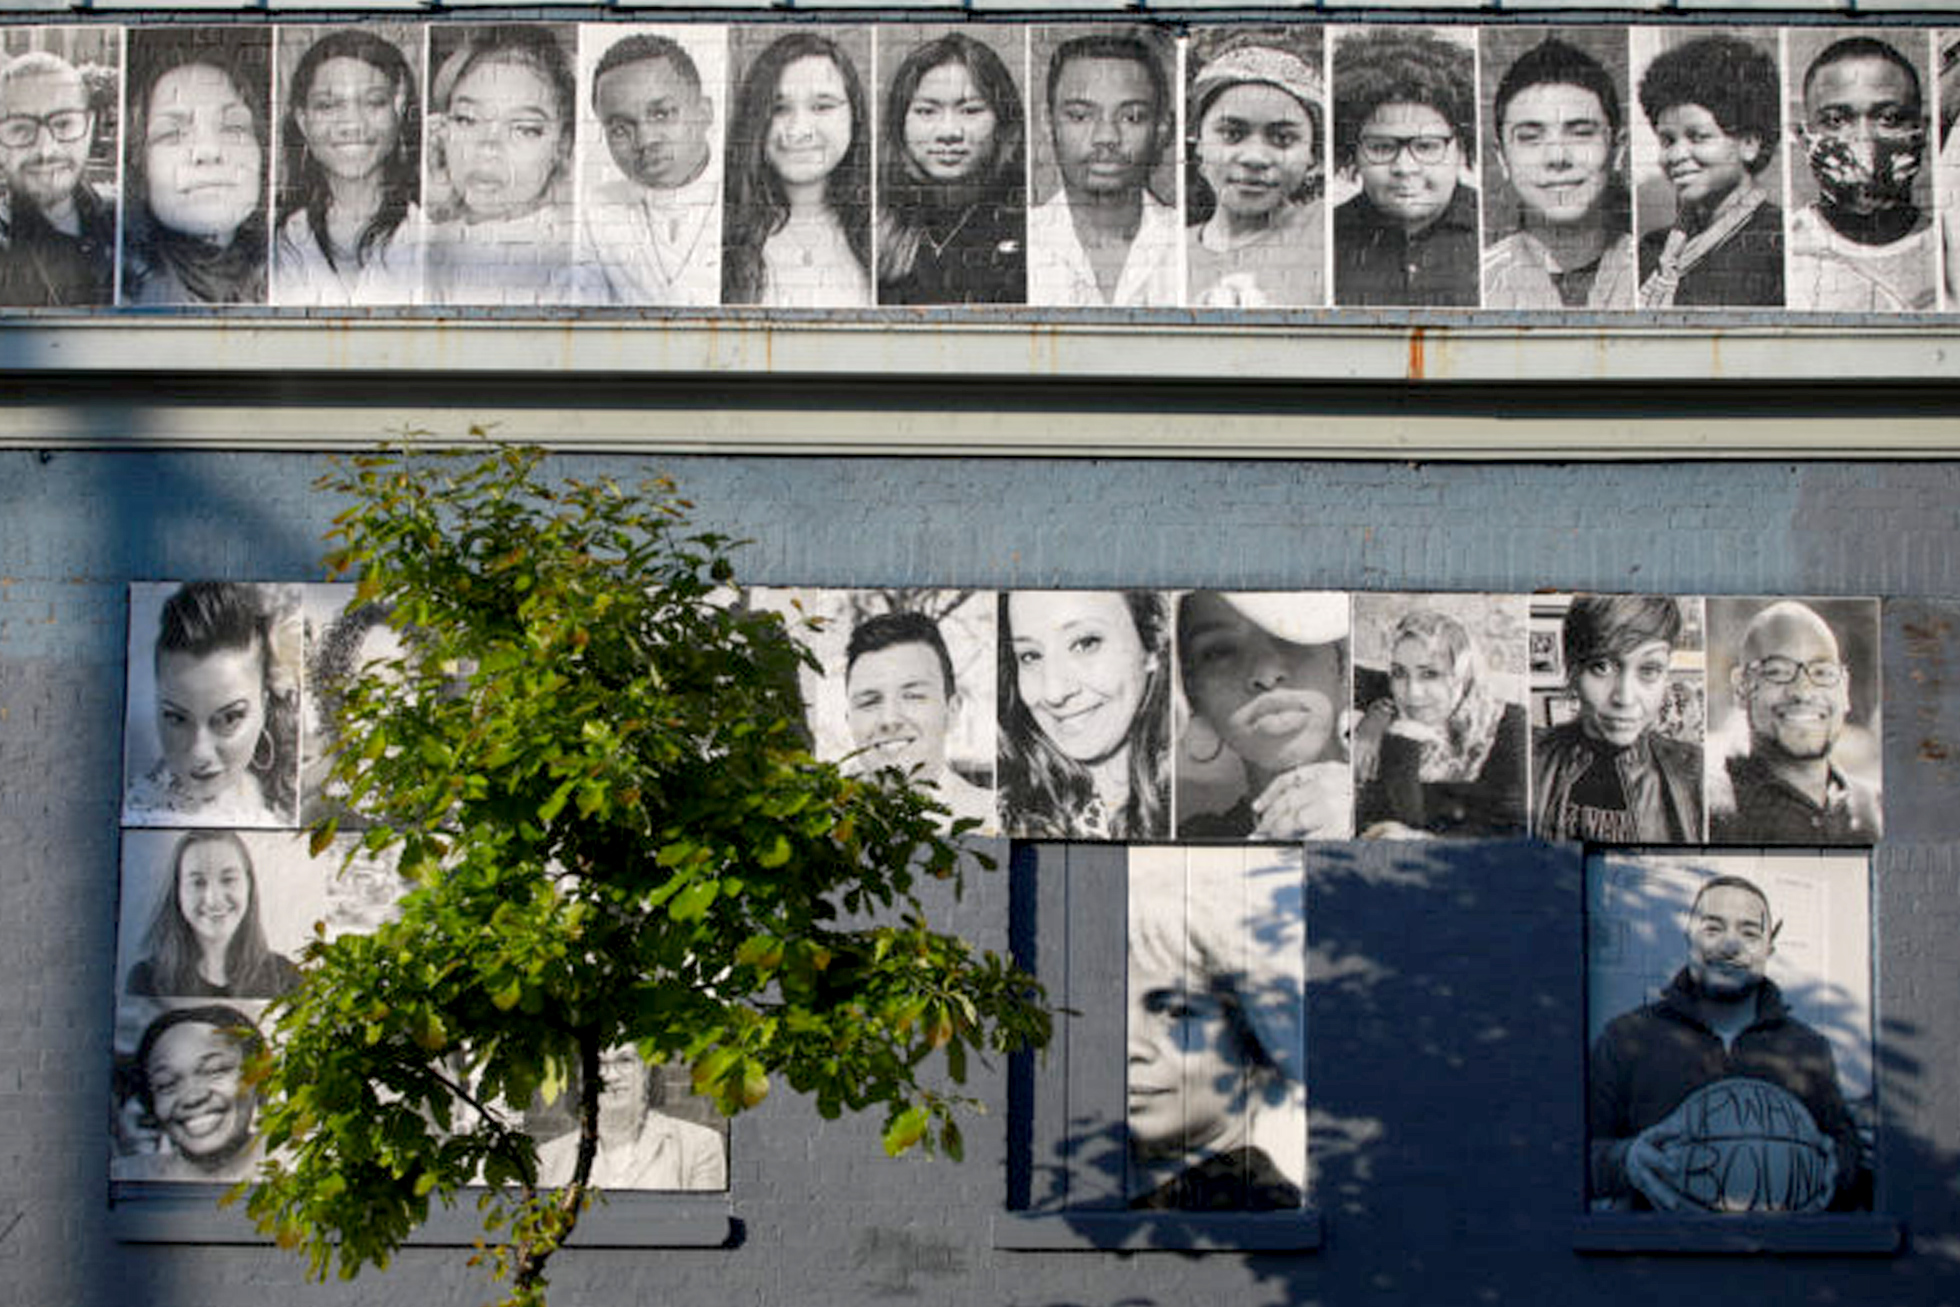 mural of people's portraits in black and white on the side of a brick building